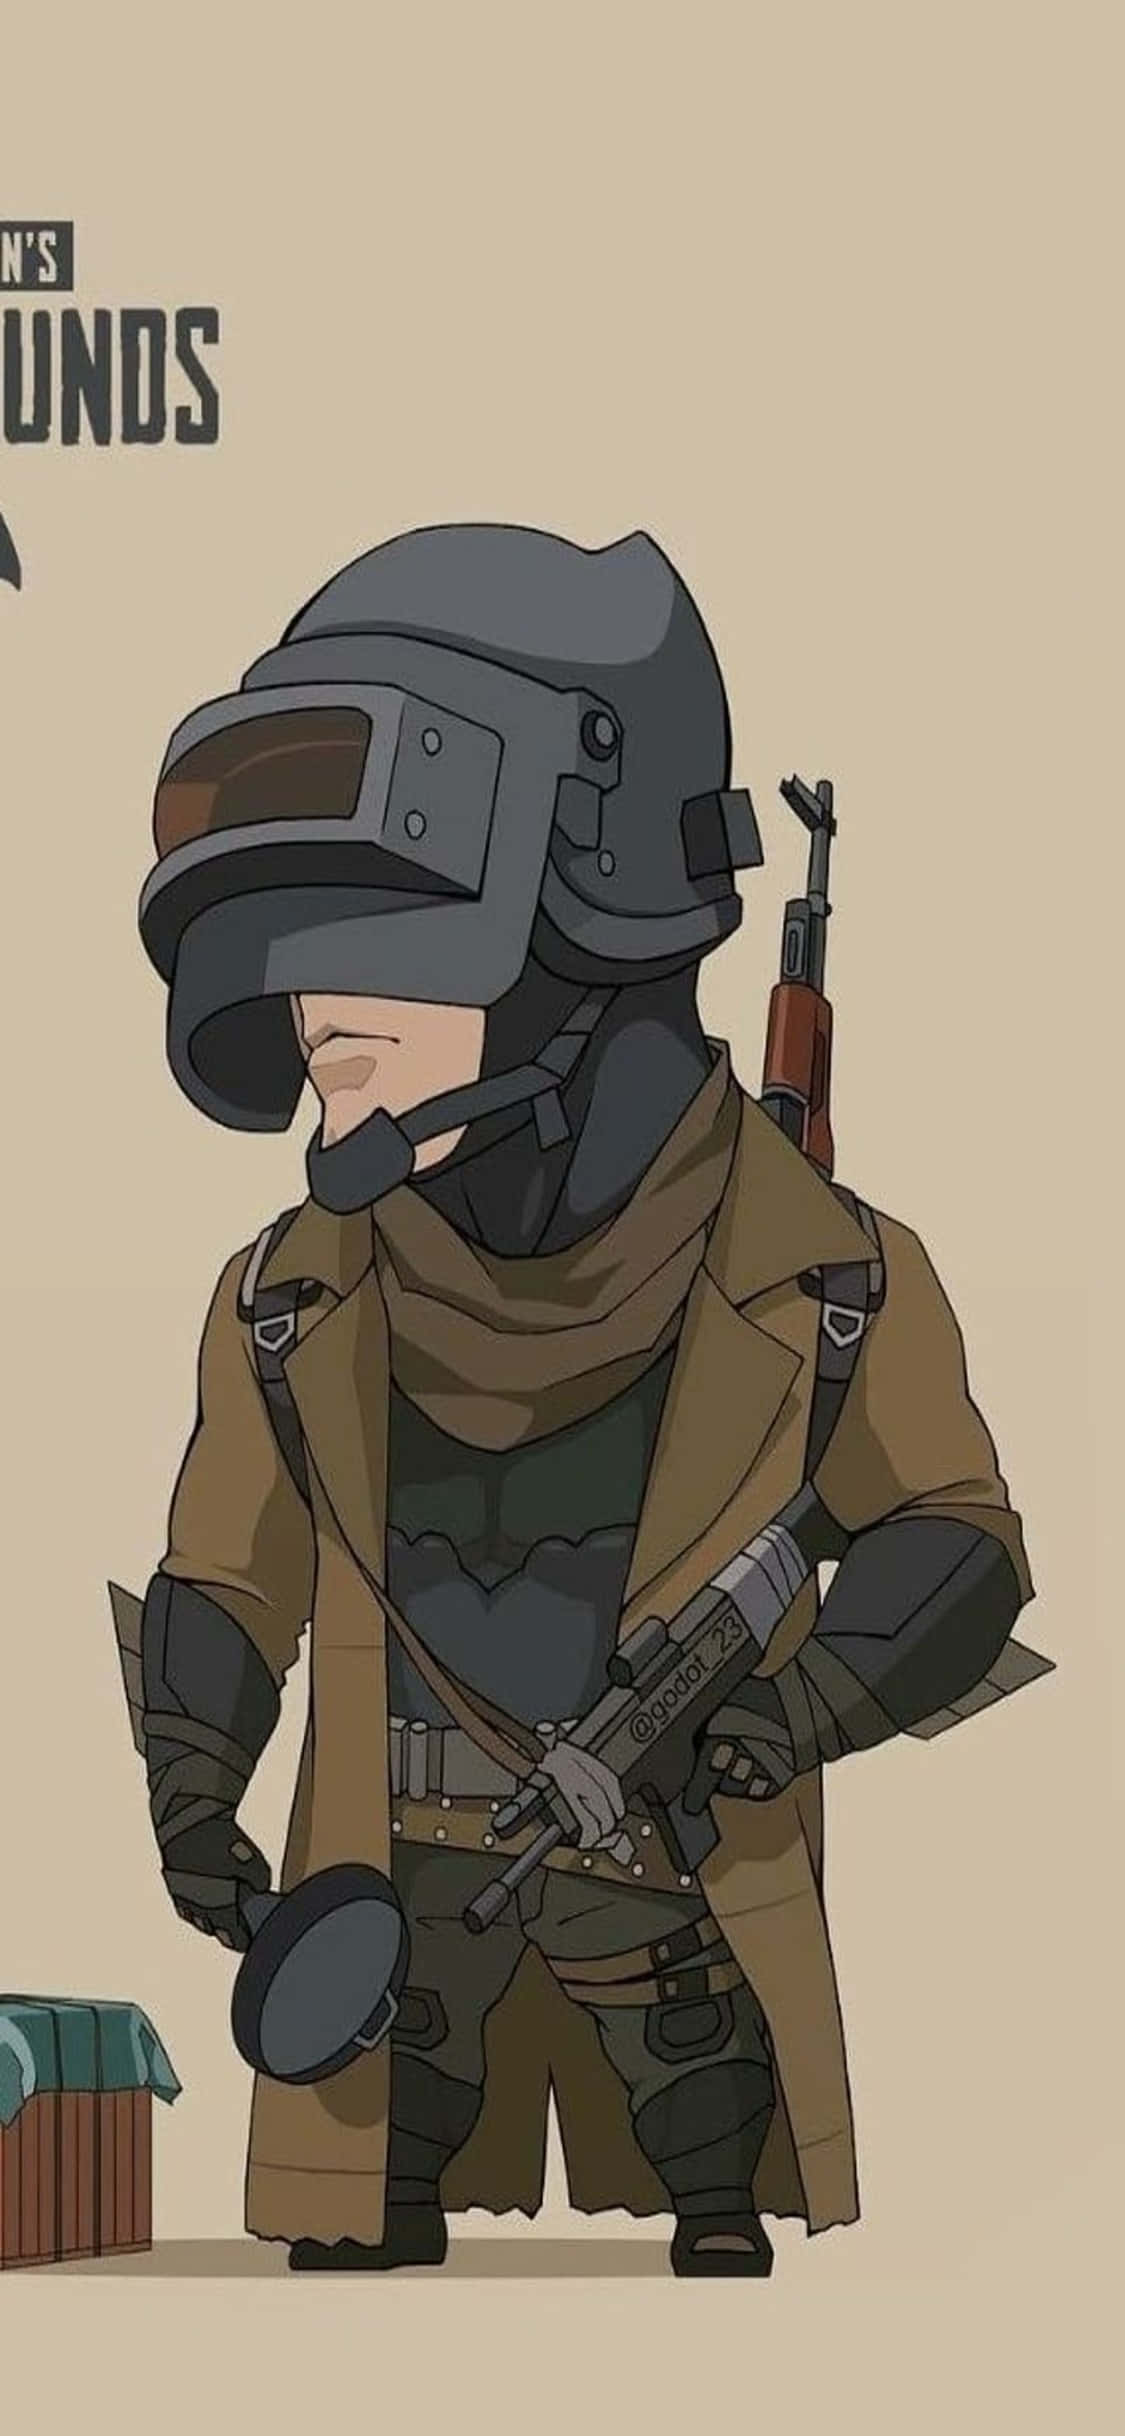 A Cartoon Character With A Gun And A Helmet